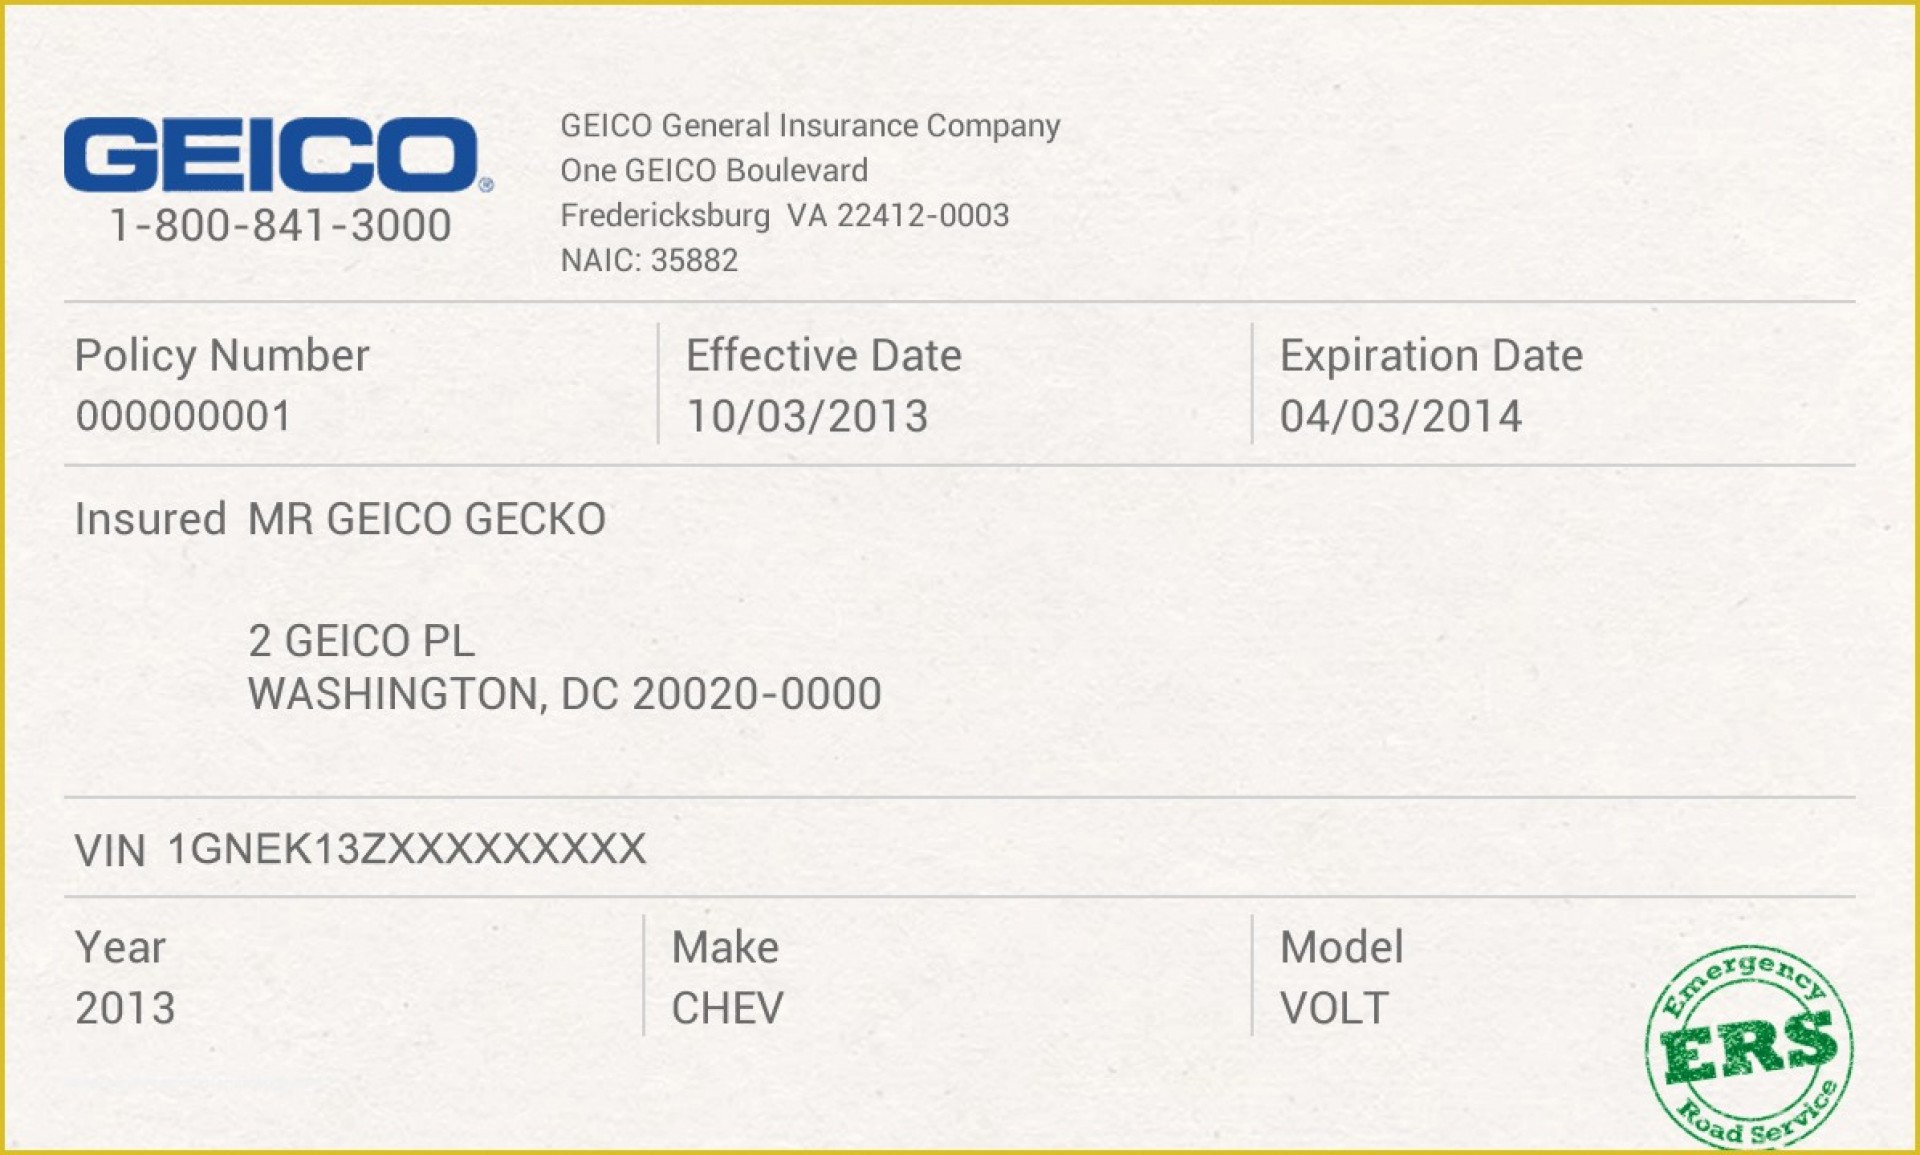 012 Company Car Policy Template Free Auto Insurance Id Card With Regard To Car Insurance Card Template Download